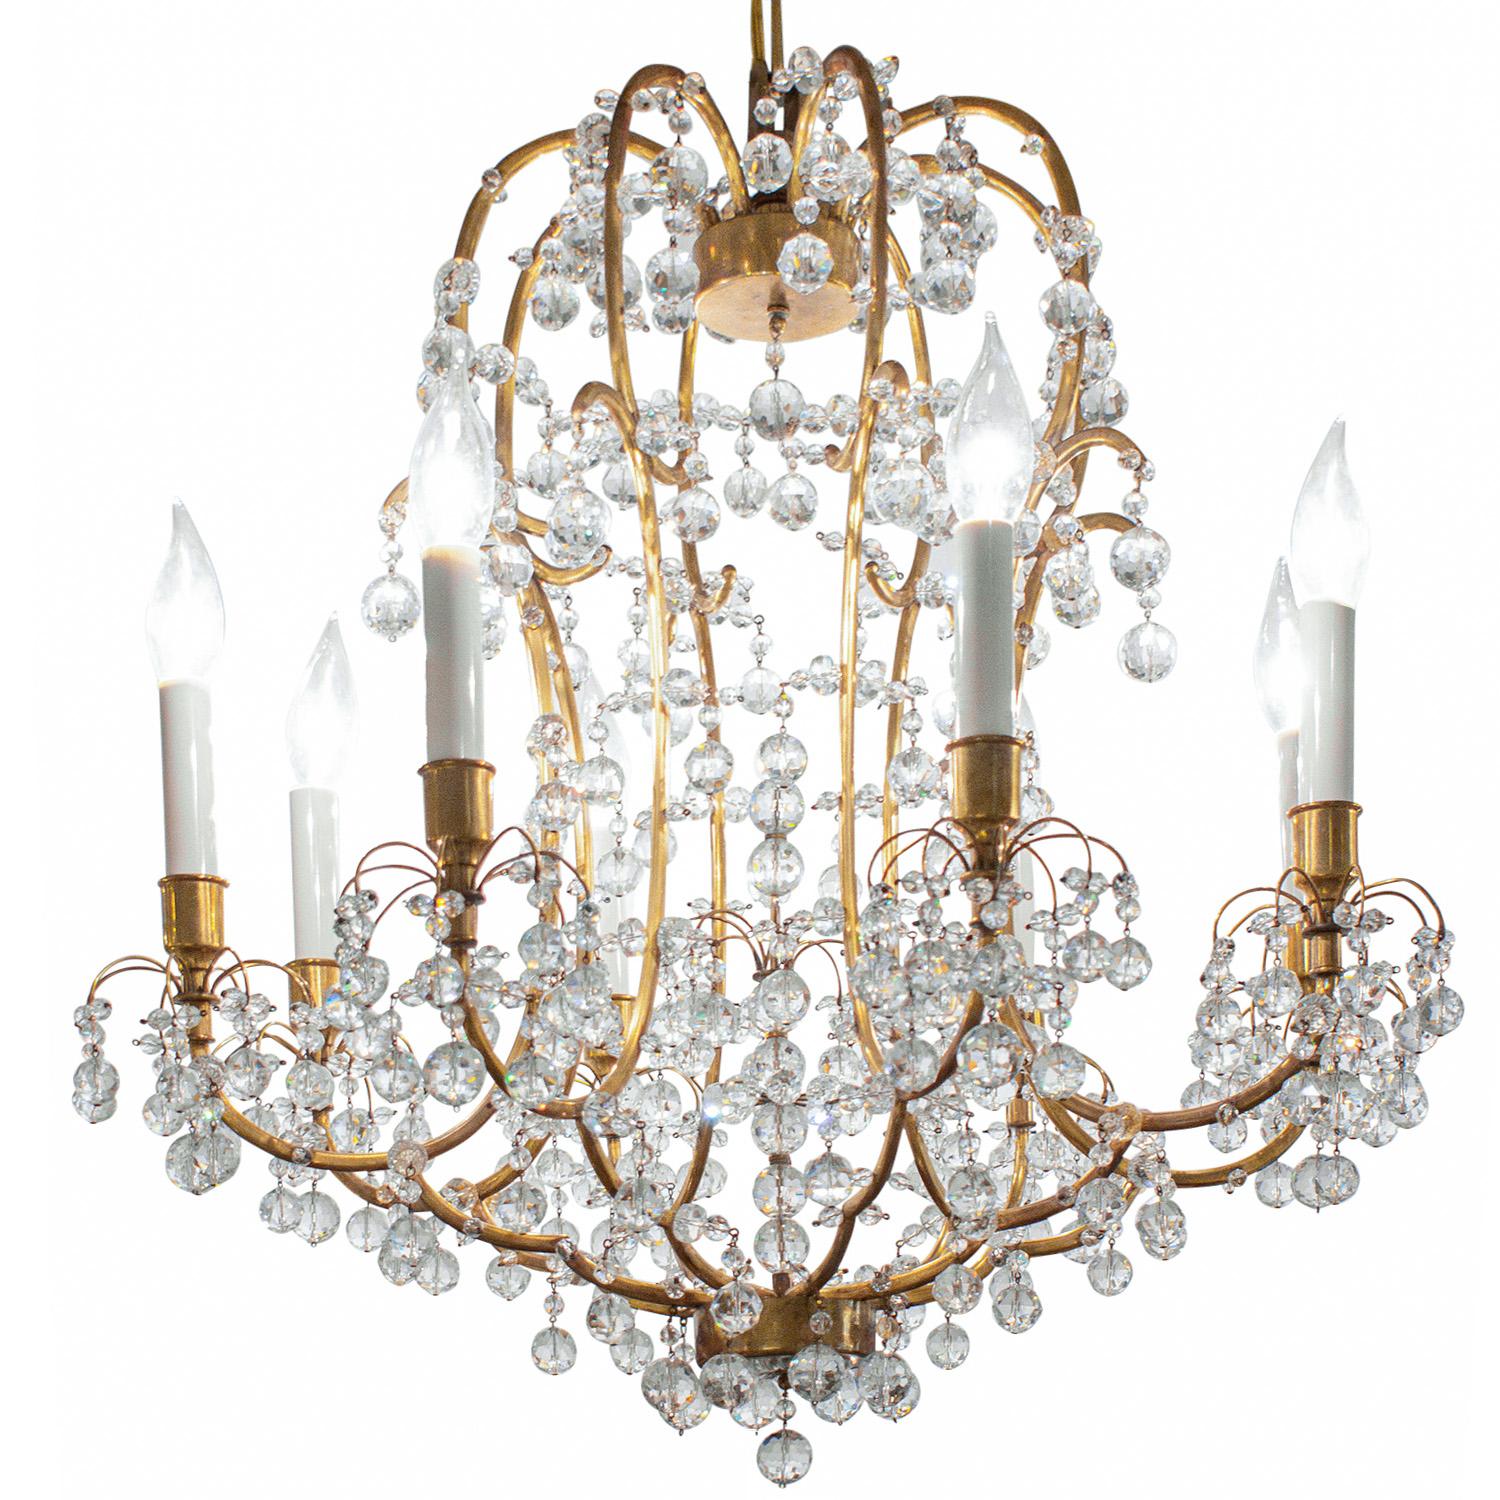 Rare chandelier model 6201 with 8 lights in brass with cut lead crystal decoration by Hans Harald Rath for J&L Lobmeyr, Austria 1959 (with original invoice).  This chandelier is absolutely stunning.  Brass and crystals have been cleaned and